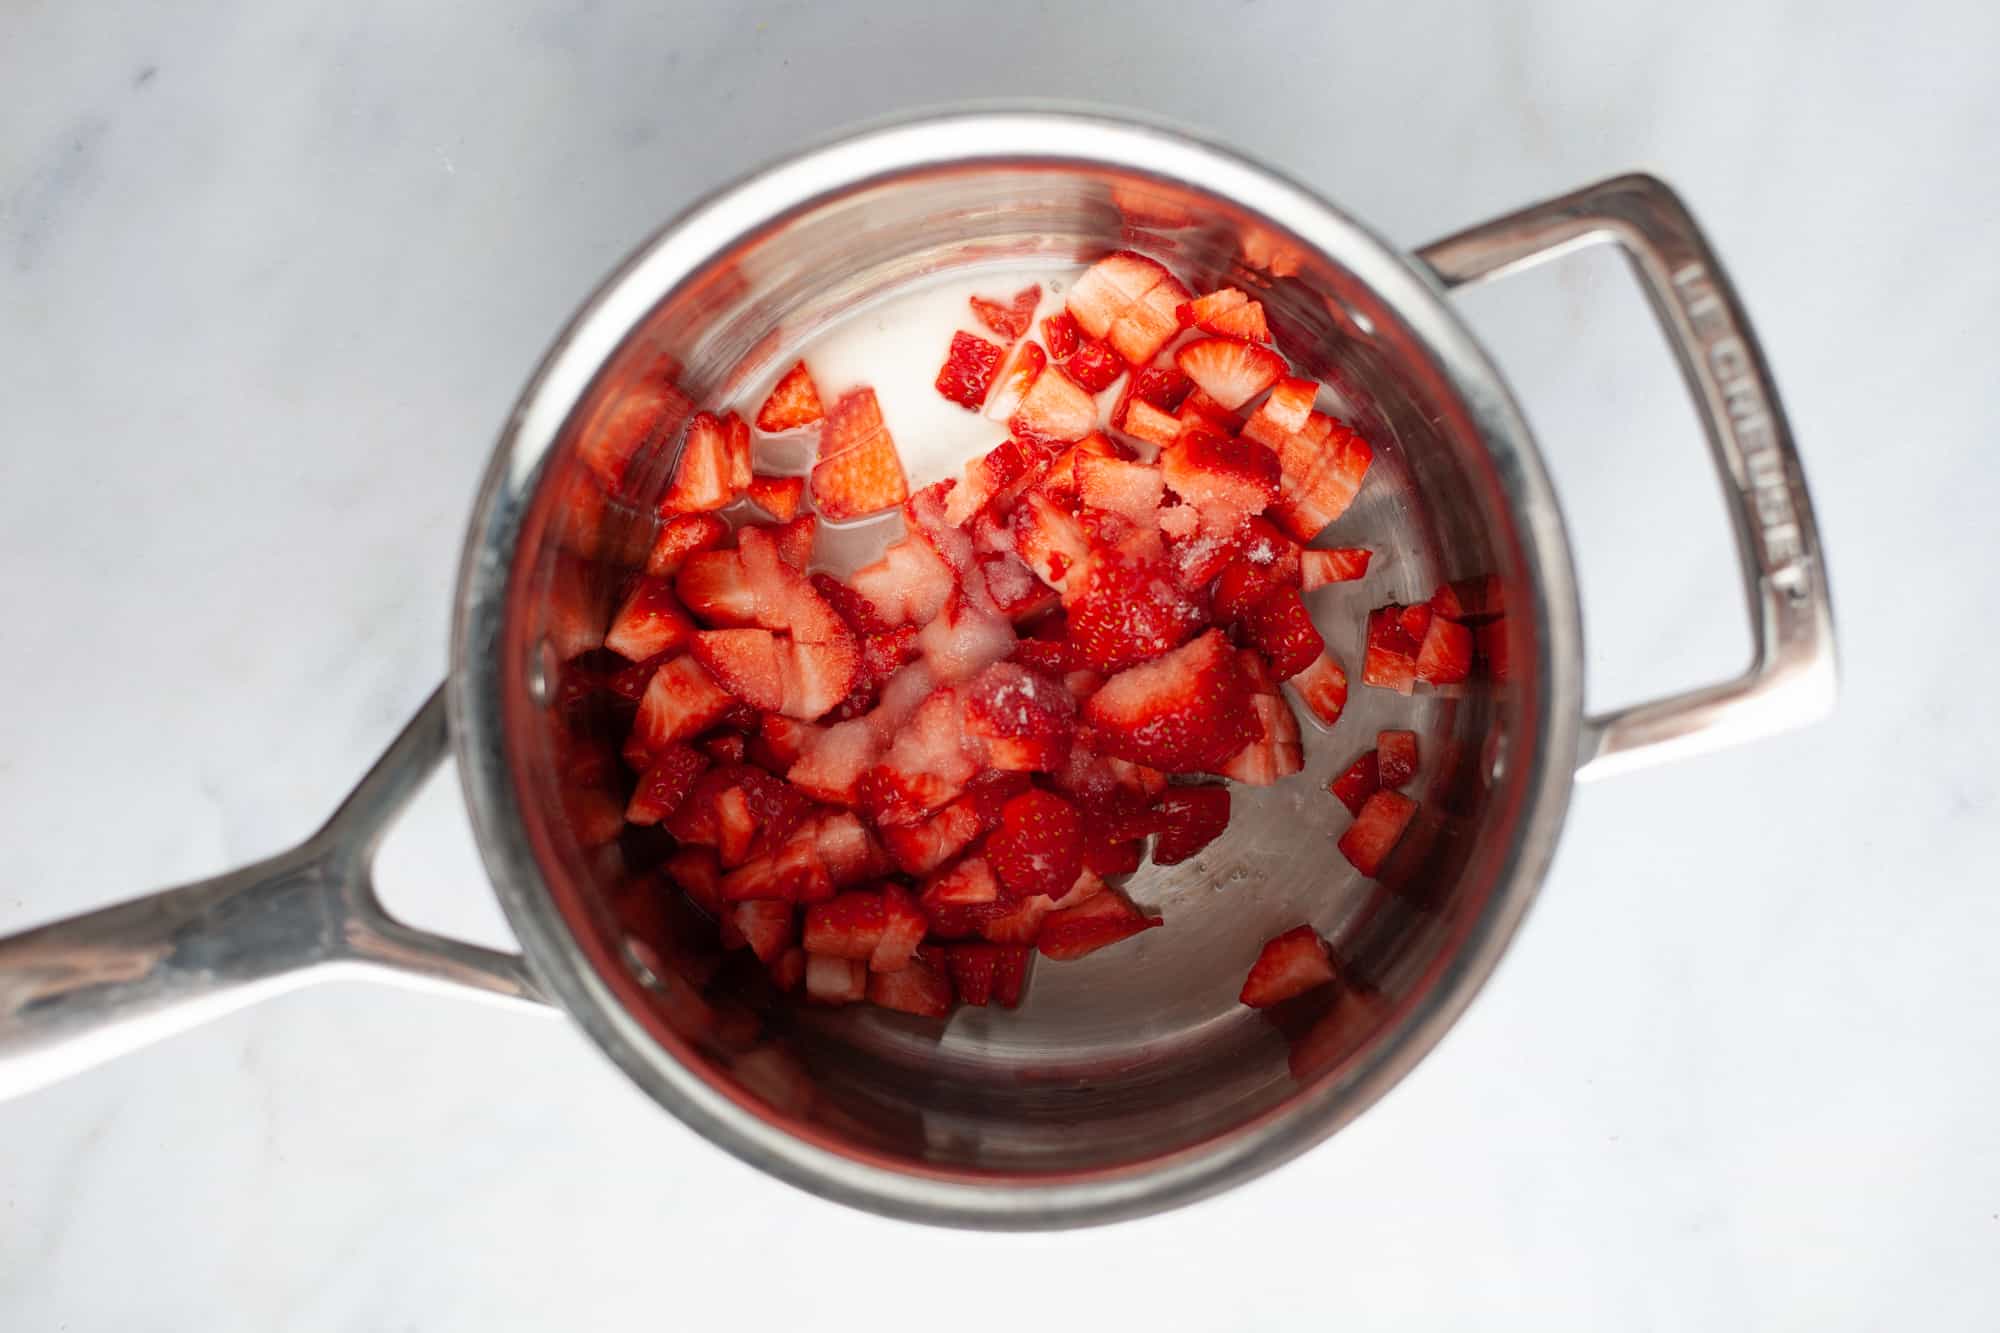 A small silver saucepan with diced strawberries inside